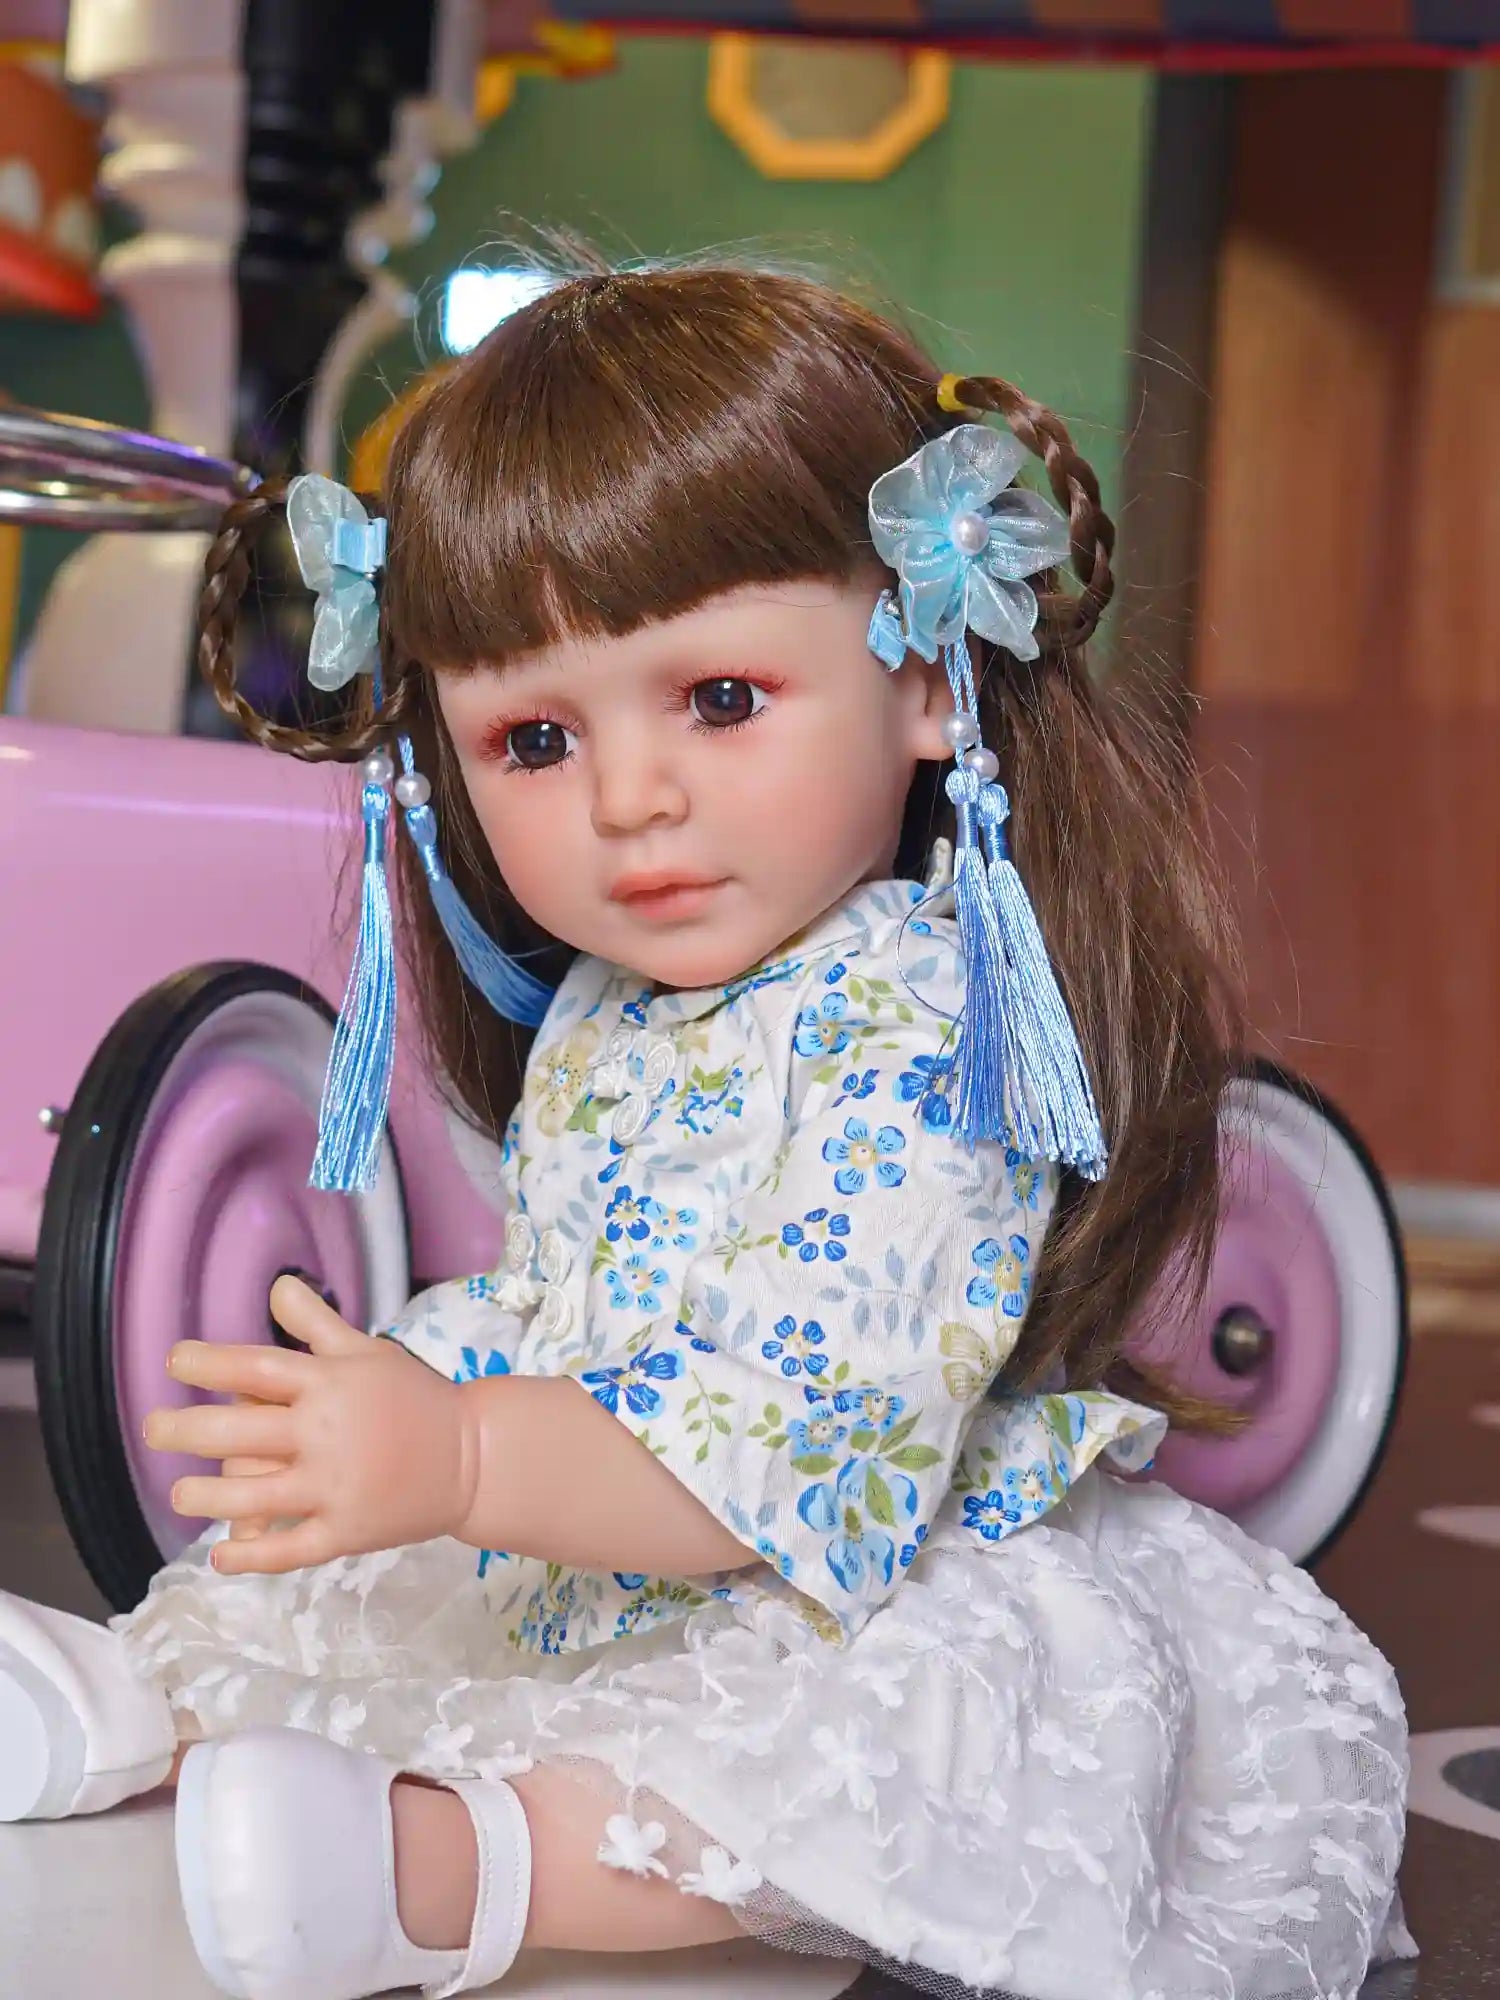 Toddler doll sitting on the floor, dressed in a blue floral dress with white lace, white shoes, and blue hair accessories, beside a pink toy car.